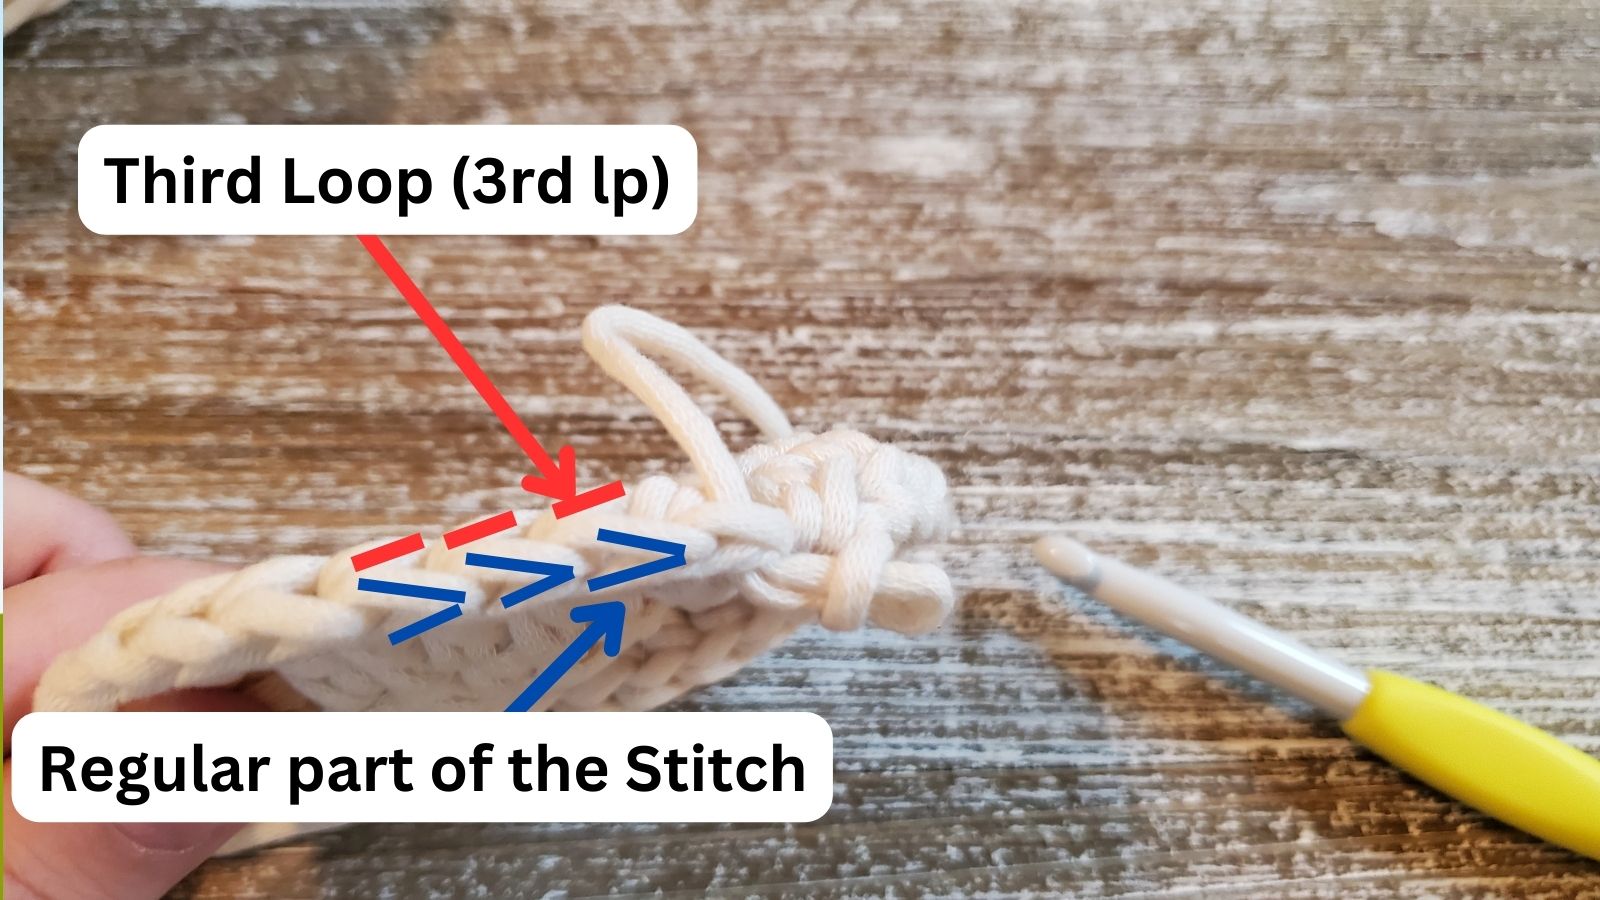 Working in the 3rd loop of a stitch, the 3rd loop is highlighted in red, the regular part of the stitch is highlighted in blue